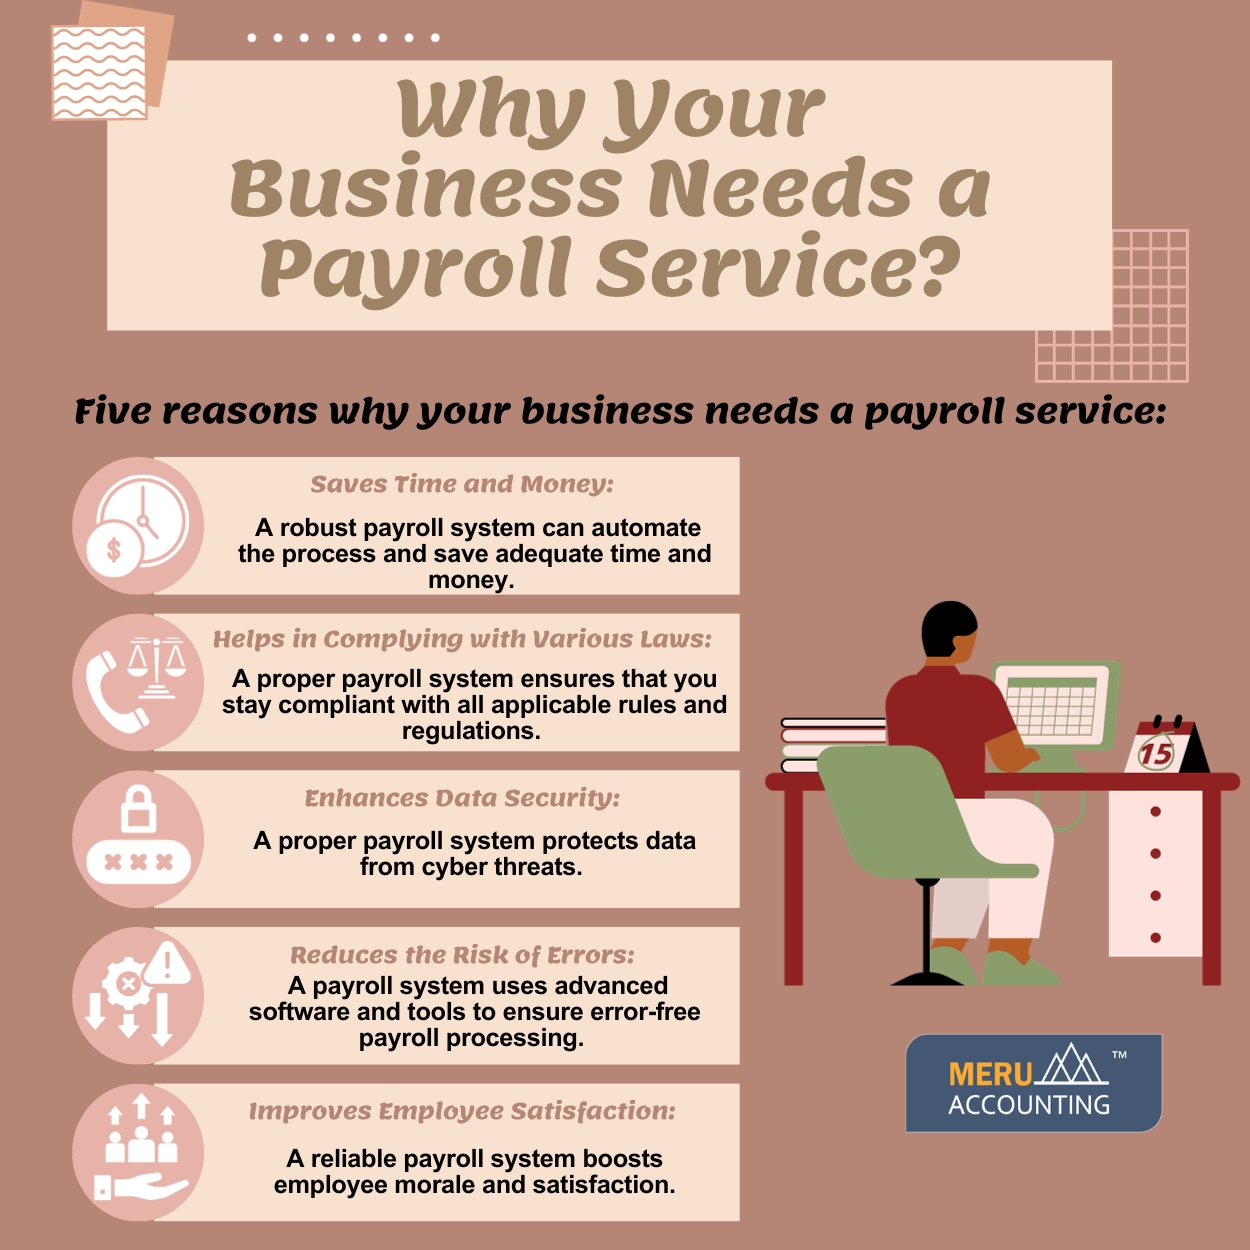 Why Your Business Needs a Payroll Service 1250 BY 1250